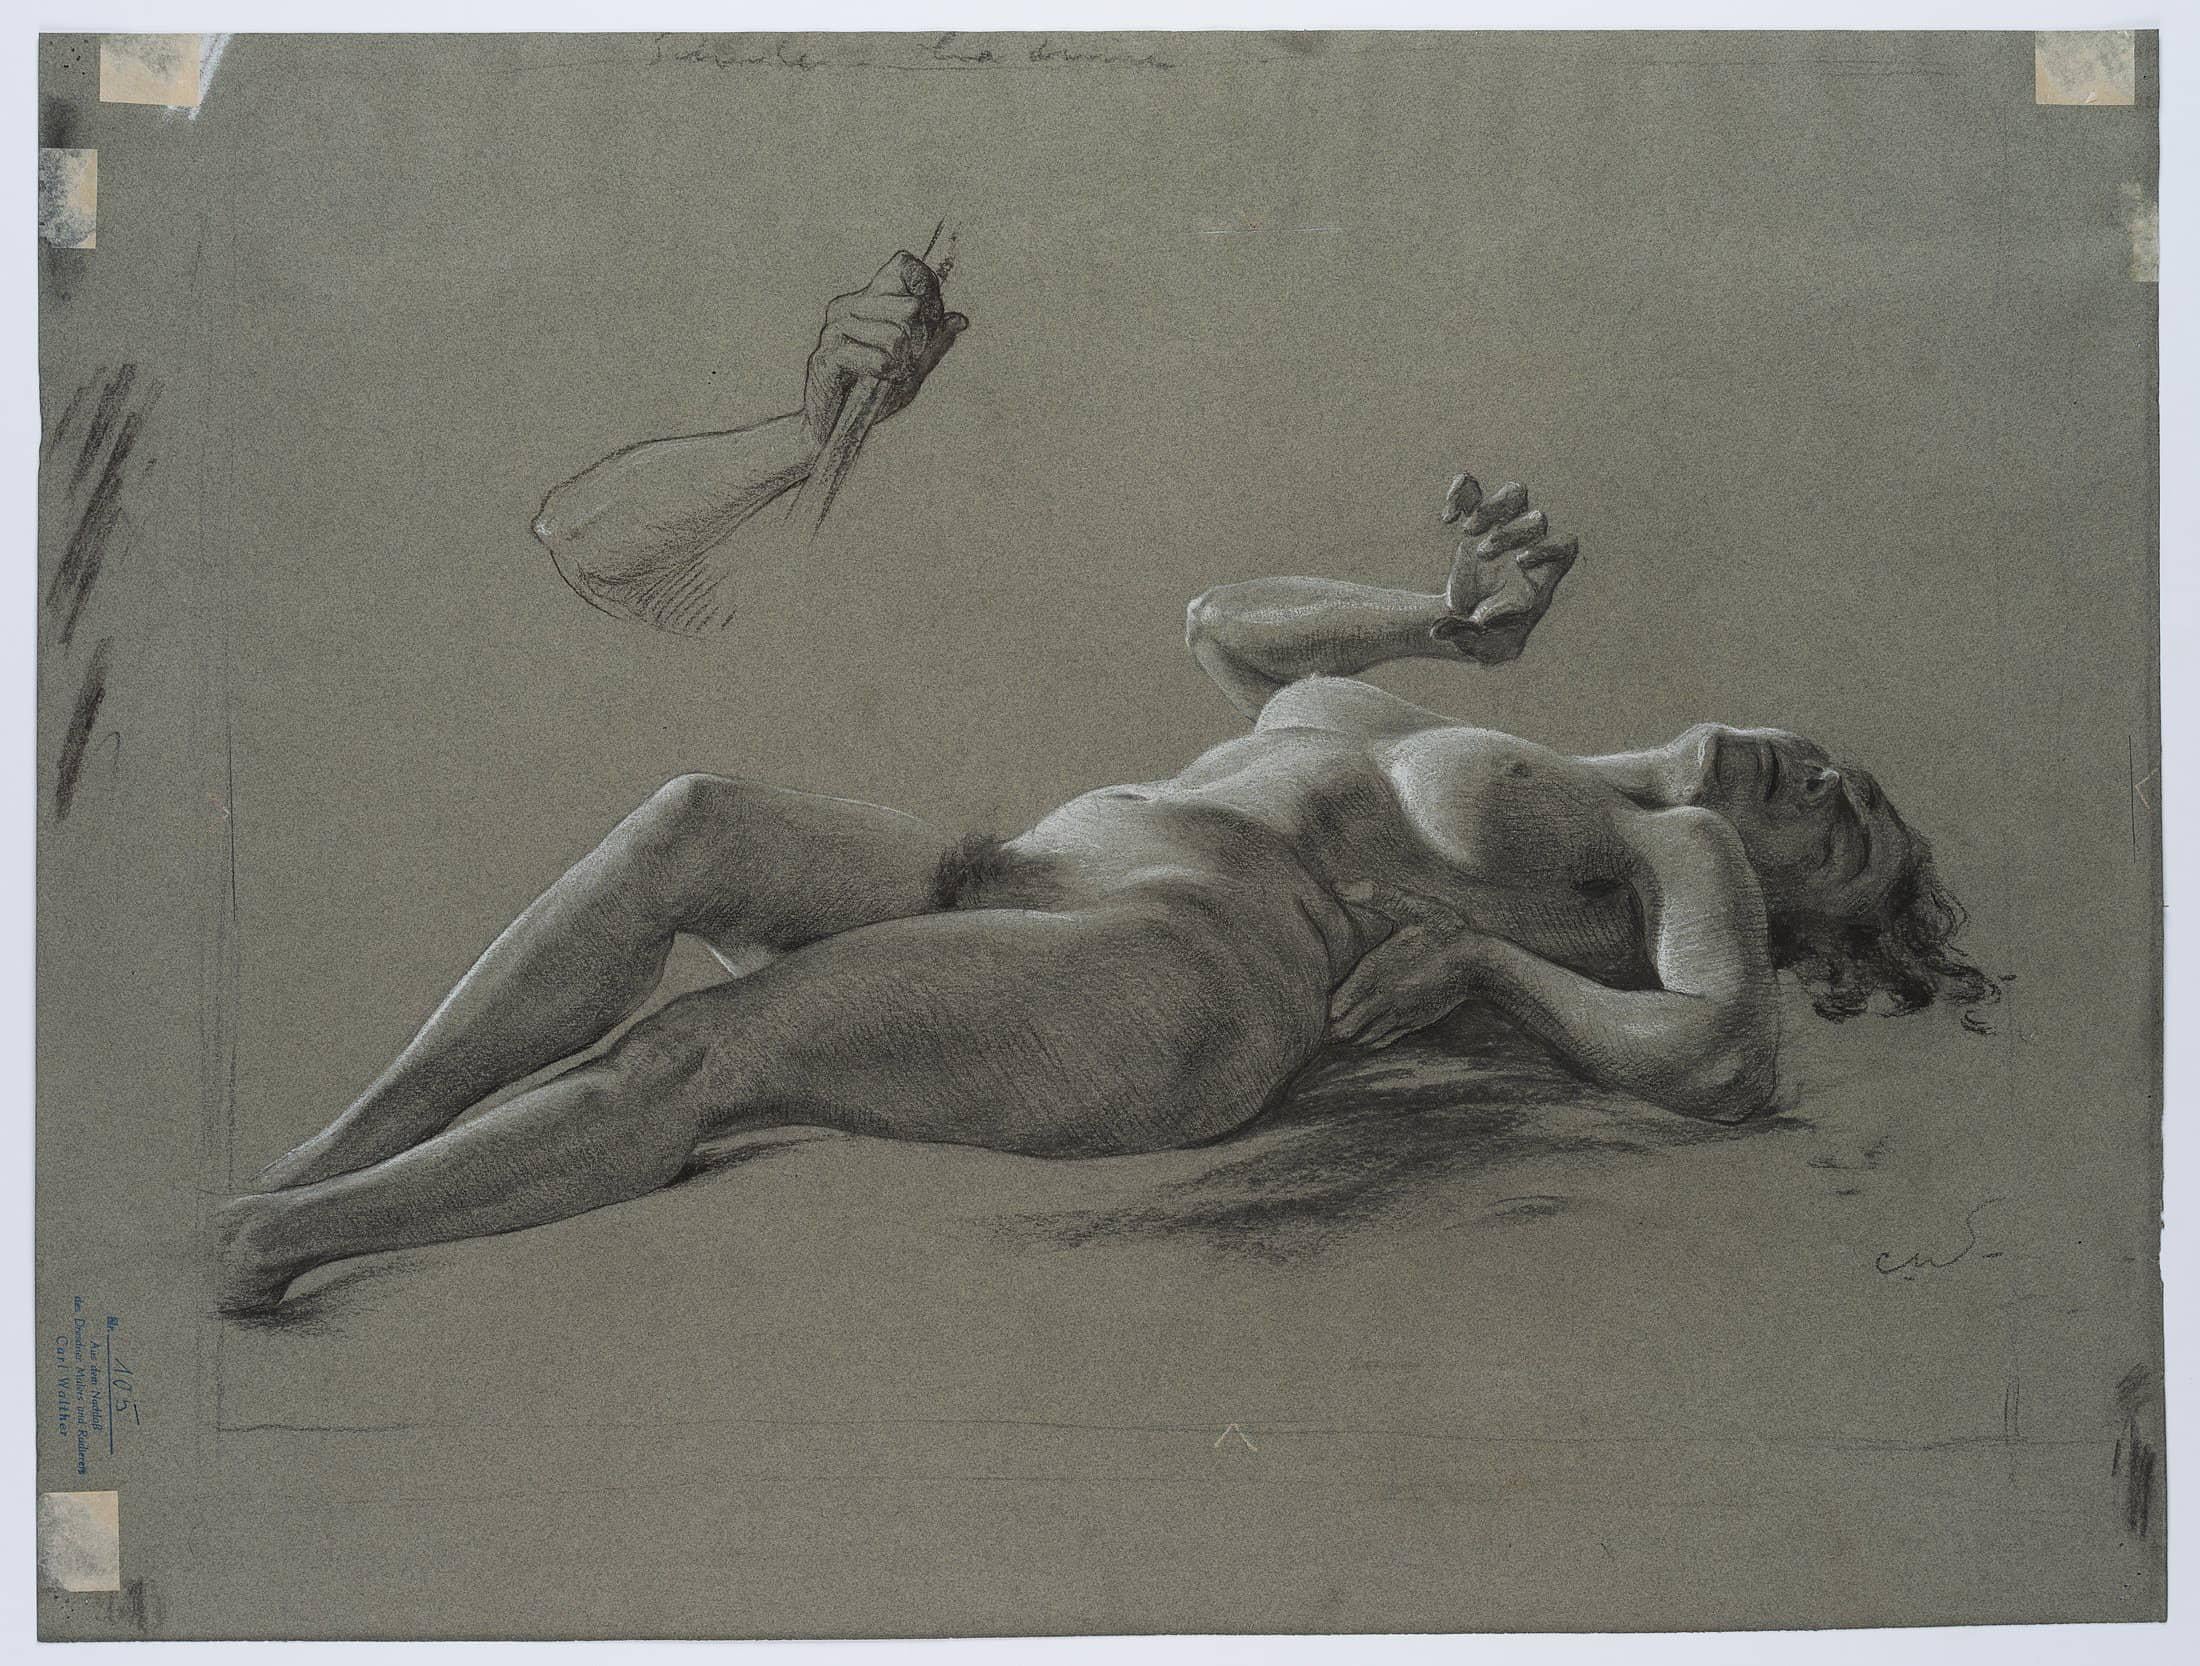 Carl August Walther (1880 Leipzig - 1956 Dresden): Reclining female nude, 20th century, Charcoal

Technique: Charcoal on Paper

Inscription: Inscribed at upper margin, monogrammed at lower right, with estate stamp at lower left.

Date: 20th